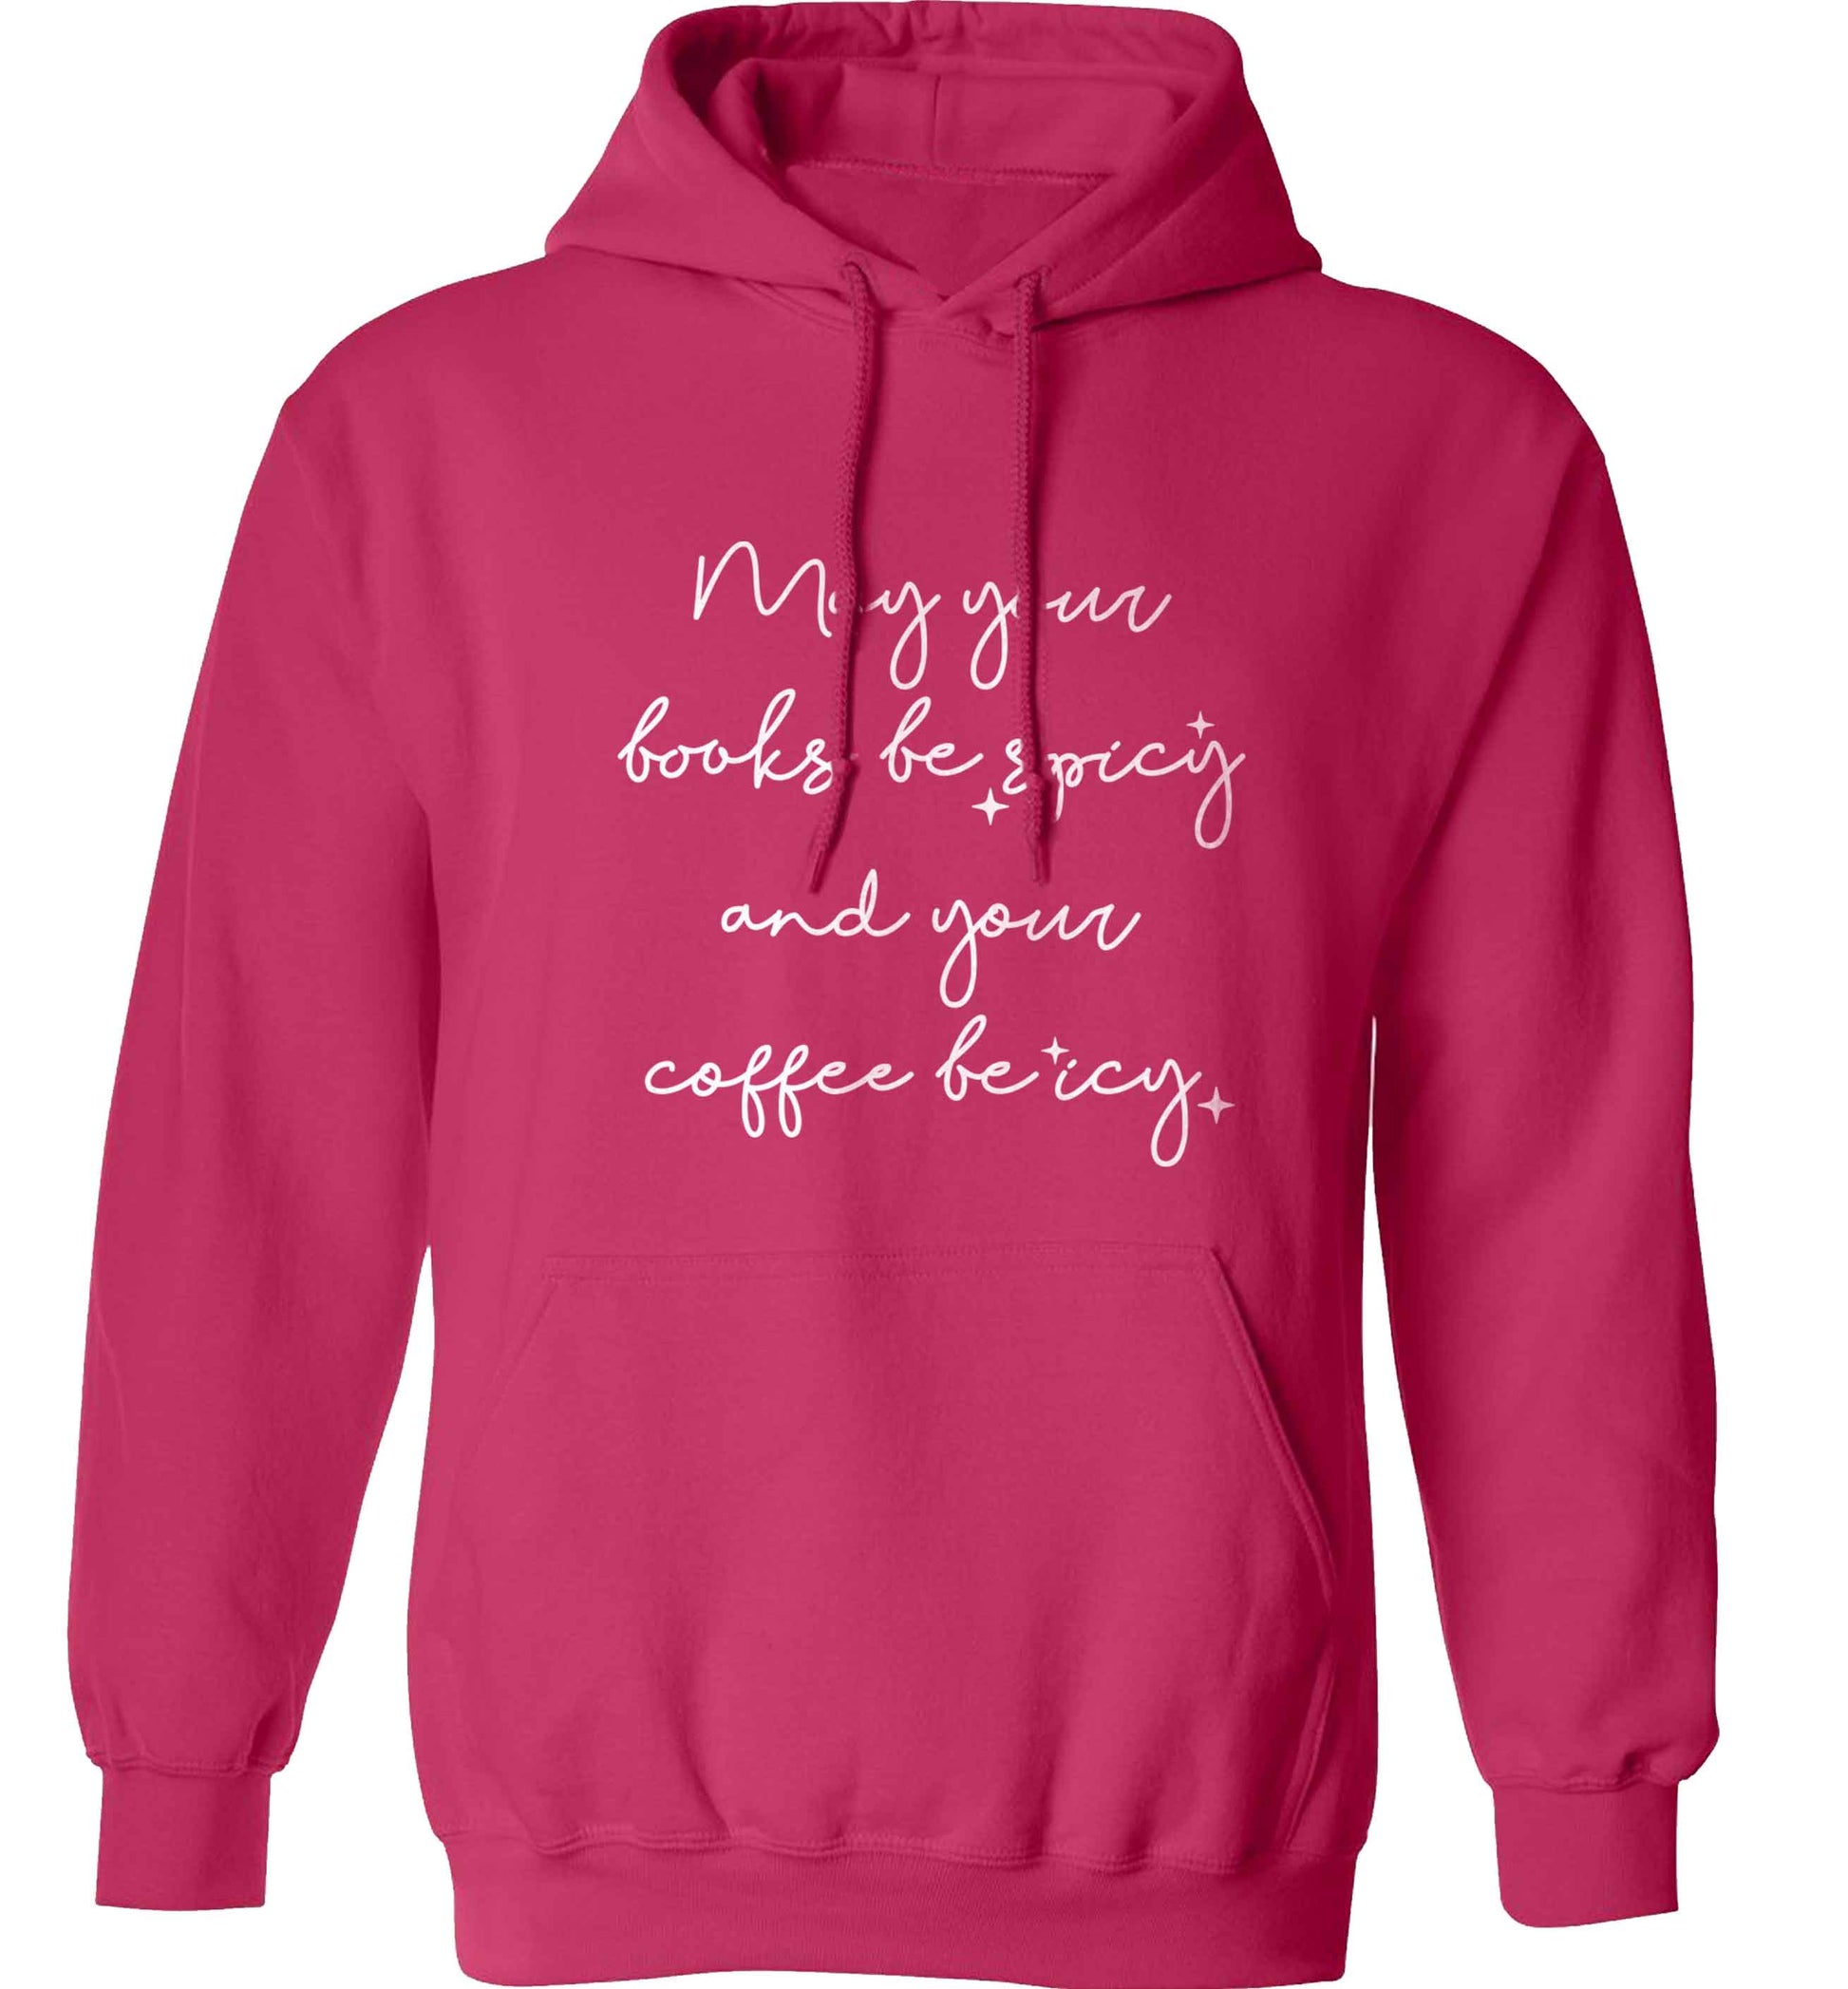 May your books be spicy and your coffee be icy adults unisex pink hoodie 2XL